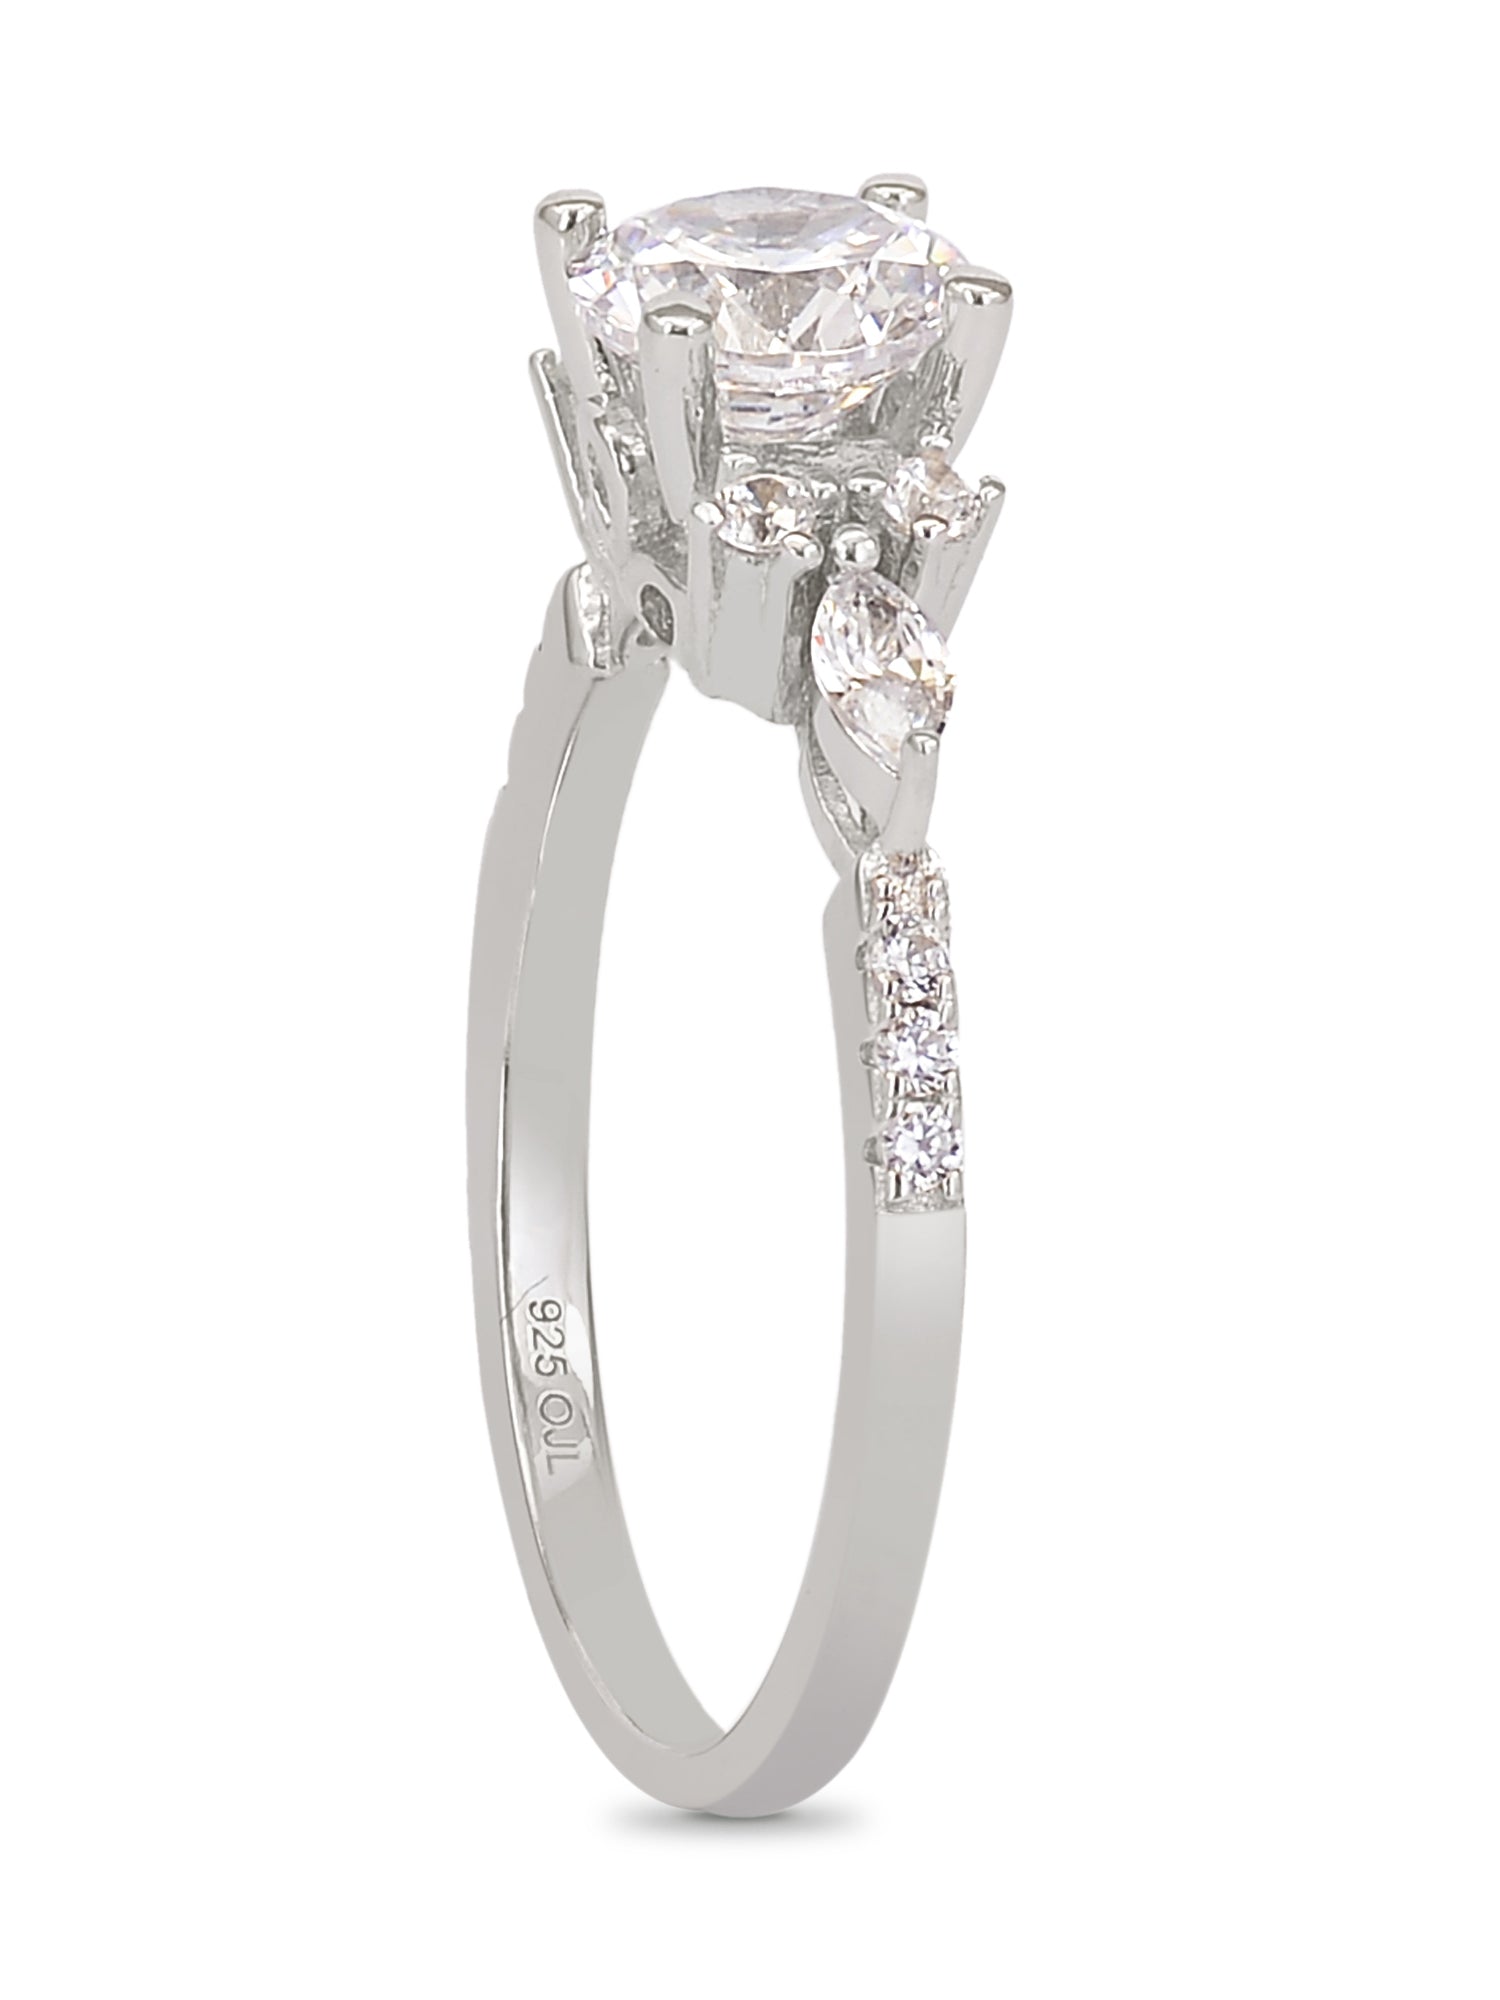 STERLING SILVER SOLITAIRE PROPOSAL RING WITH MARQUISE STONE ON SHANK